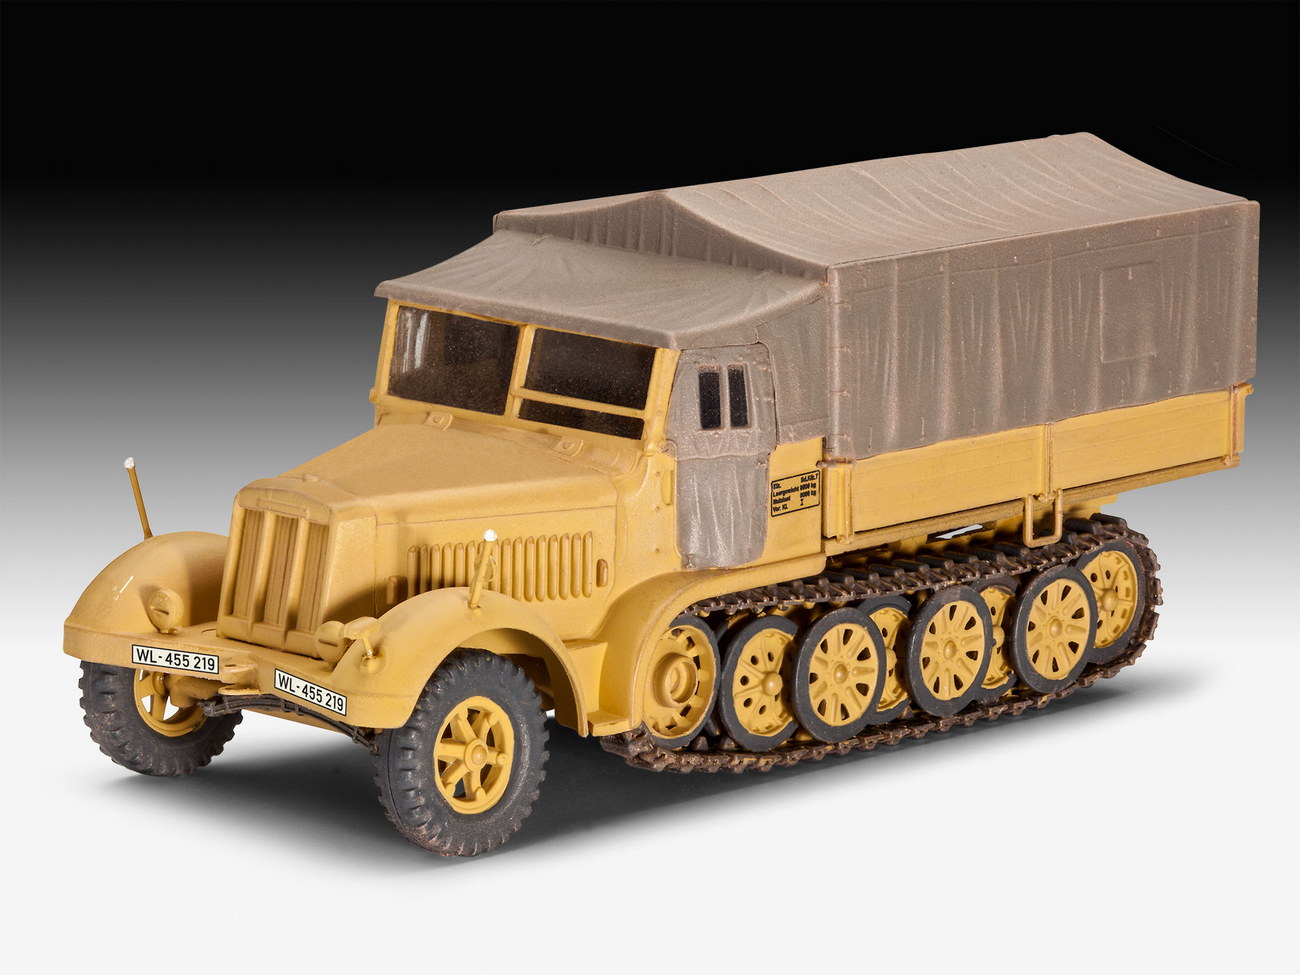 Revell 03263 - Sd.Kfz. 7 (Late Production)